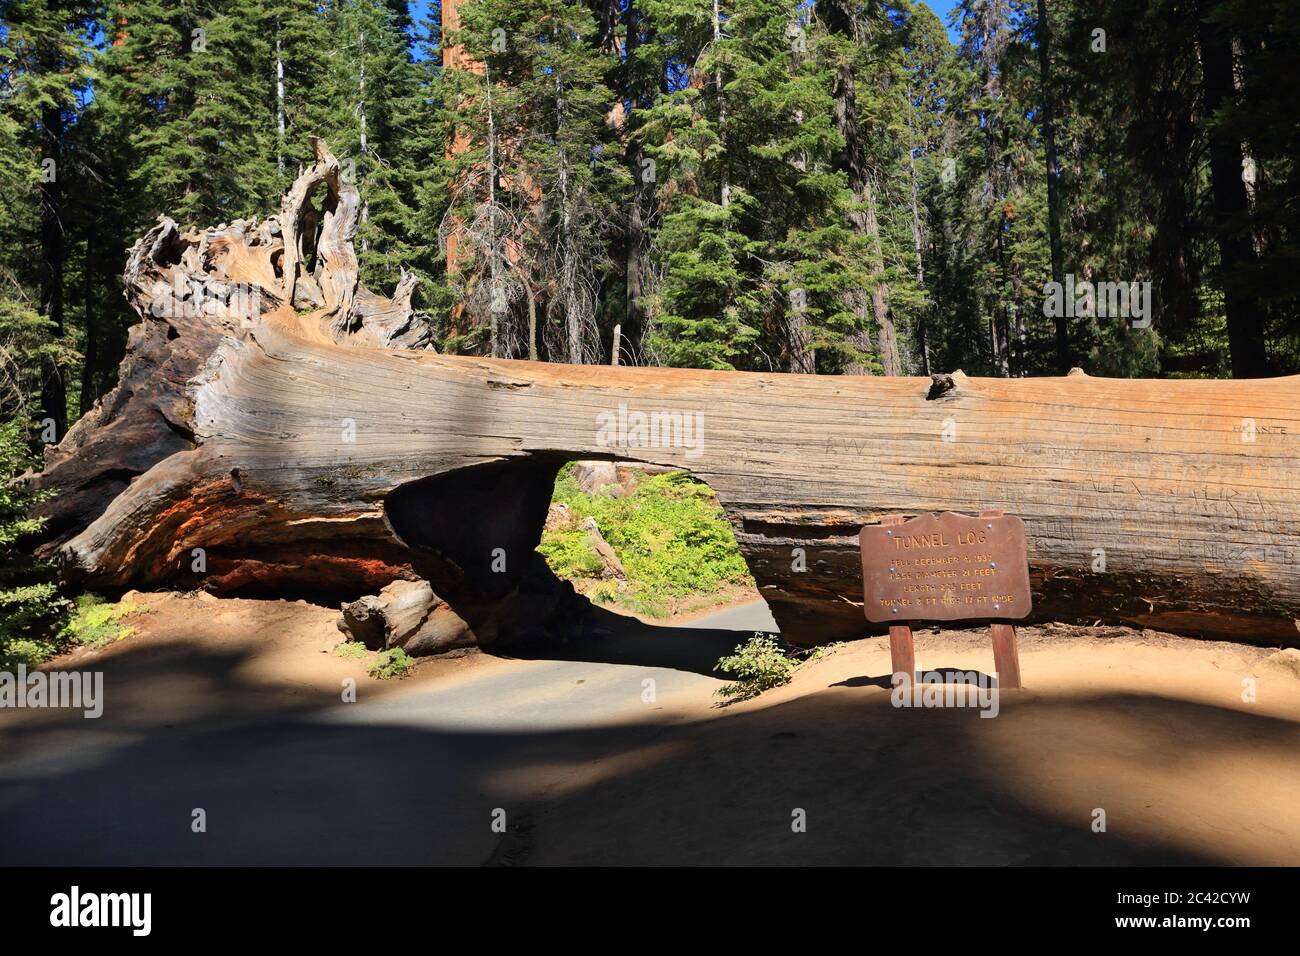 Tunnel Log in Sequoia National Park. California, United States. Stock Photo